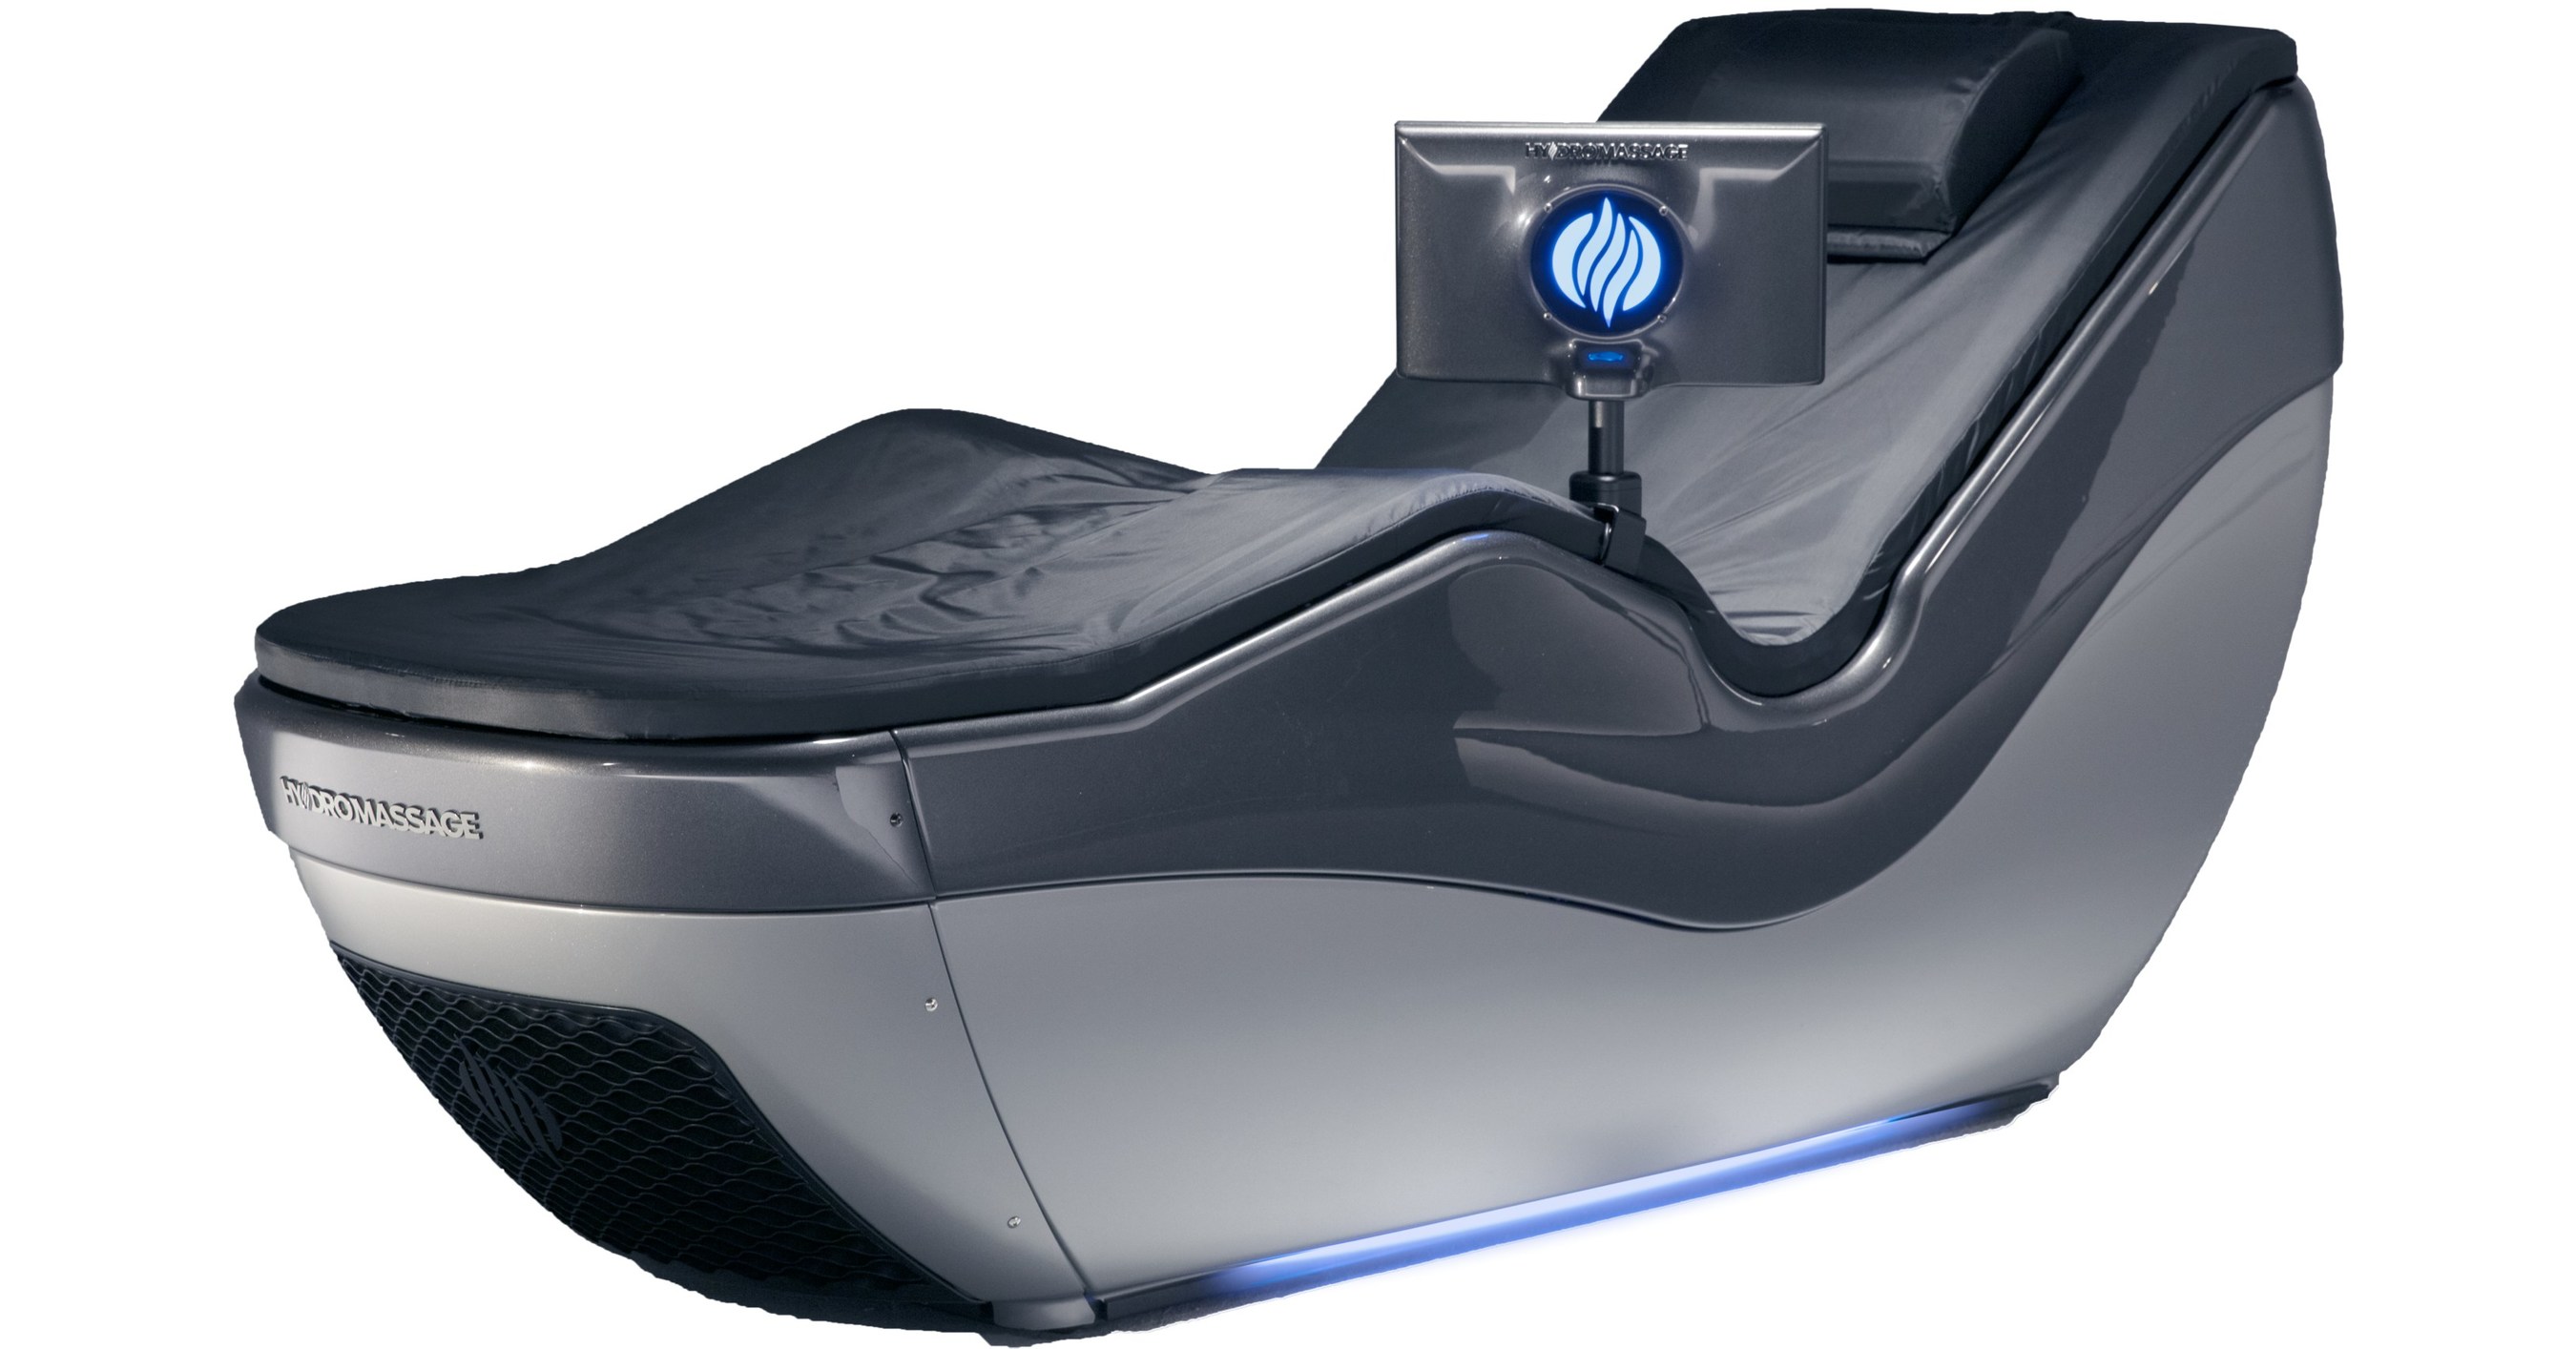 HydroMassage Introduces All-New Lounge 440X; Next Generation of Water